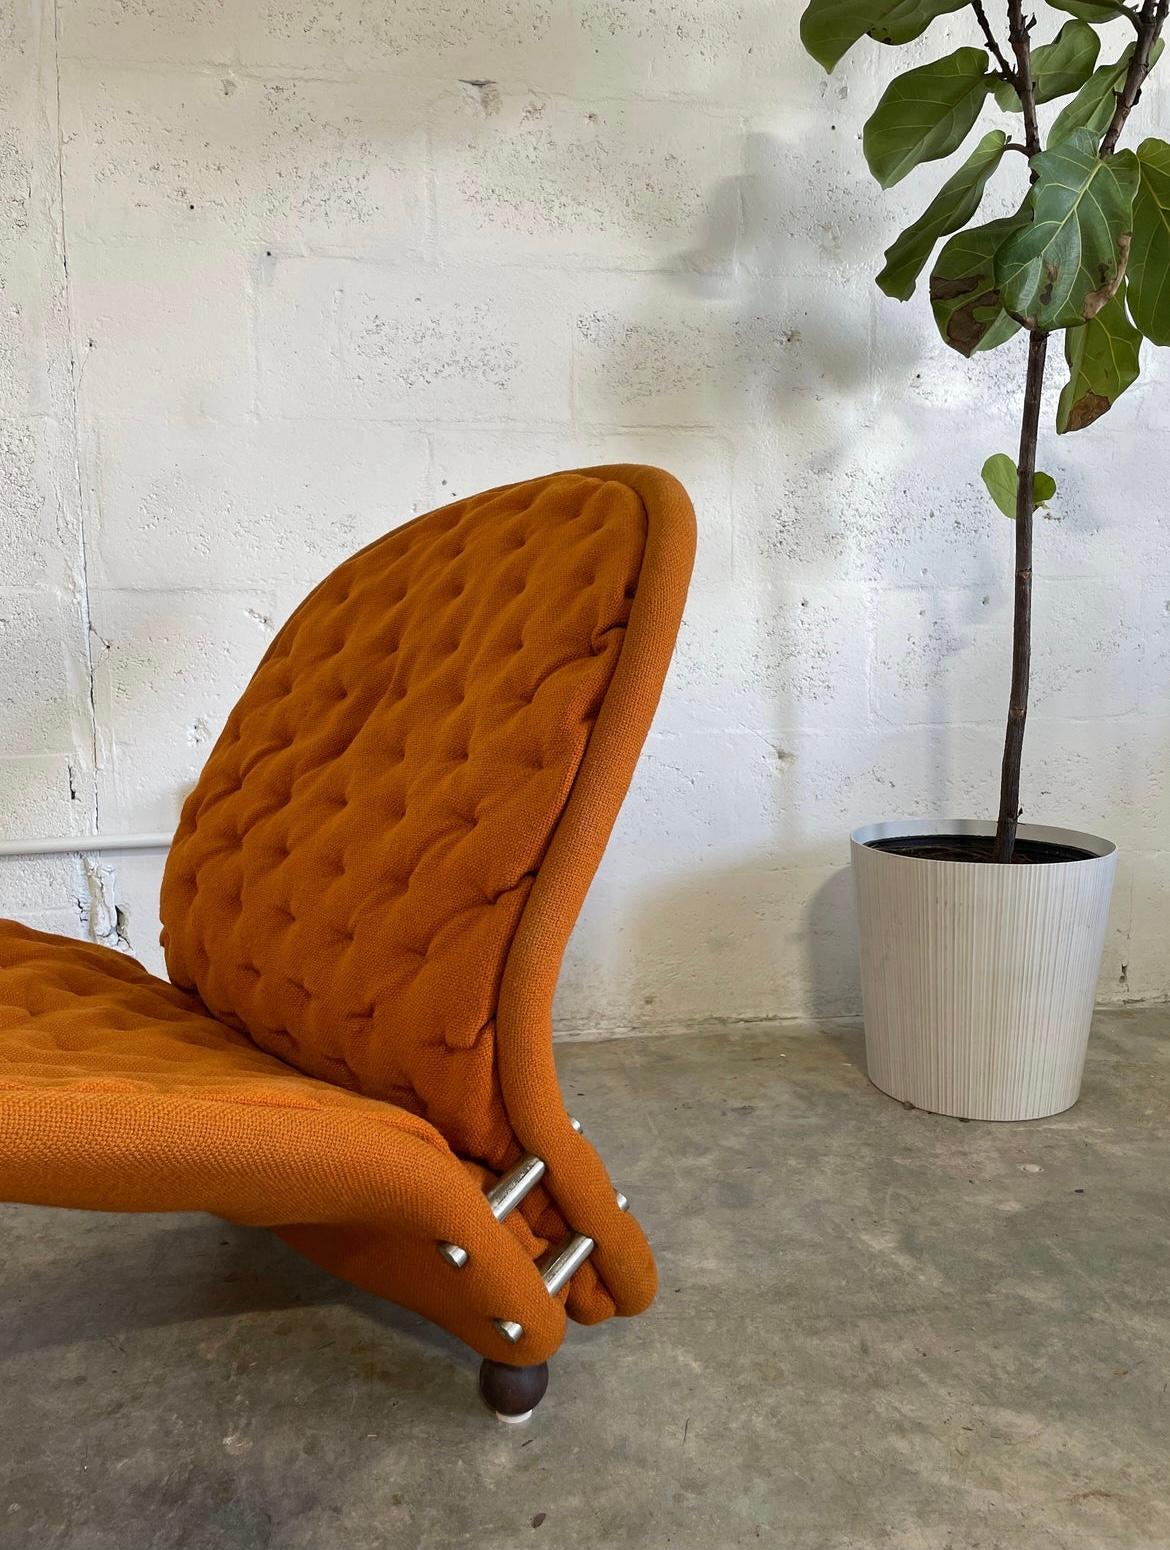 Very rare Verner Panton 123 Easy Chair G de Luxe or Model G. Designed in 1973 and produced by Fritz Hansen. 